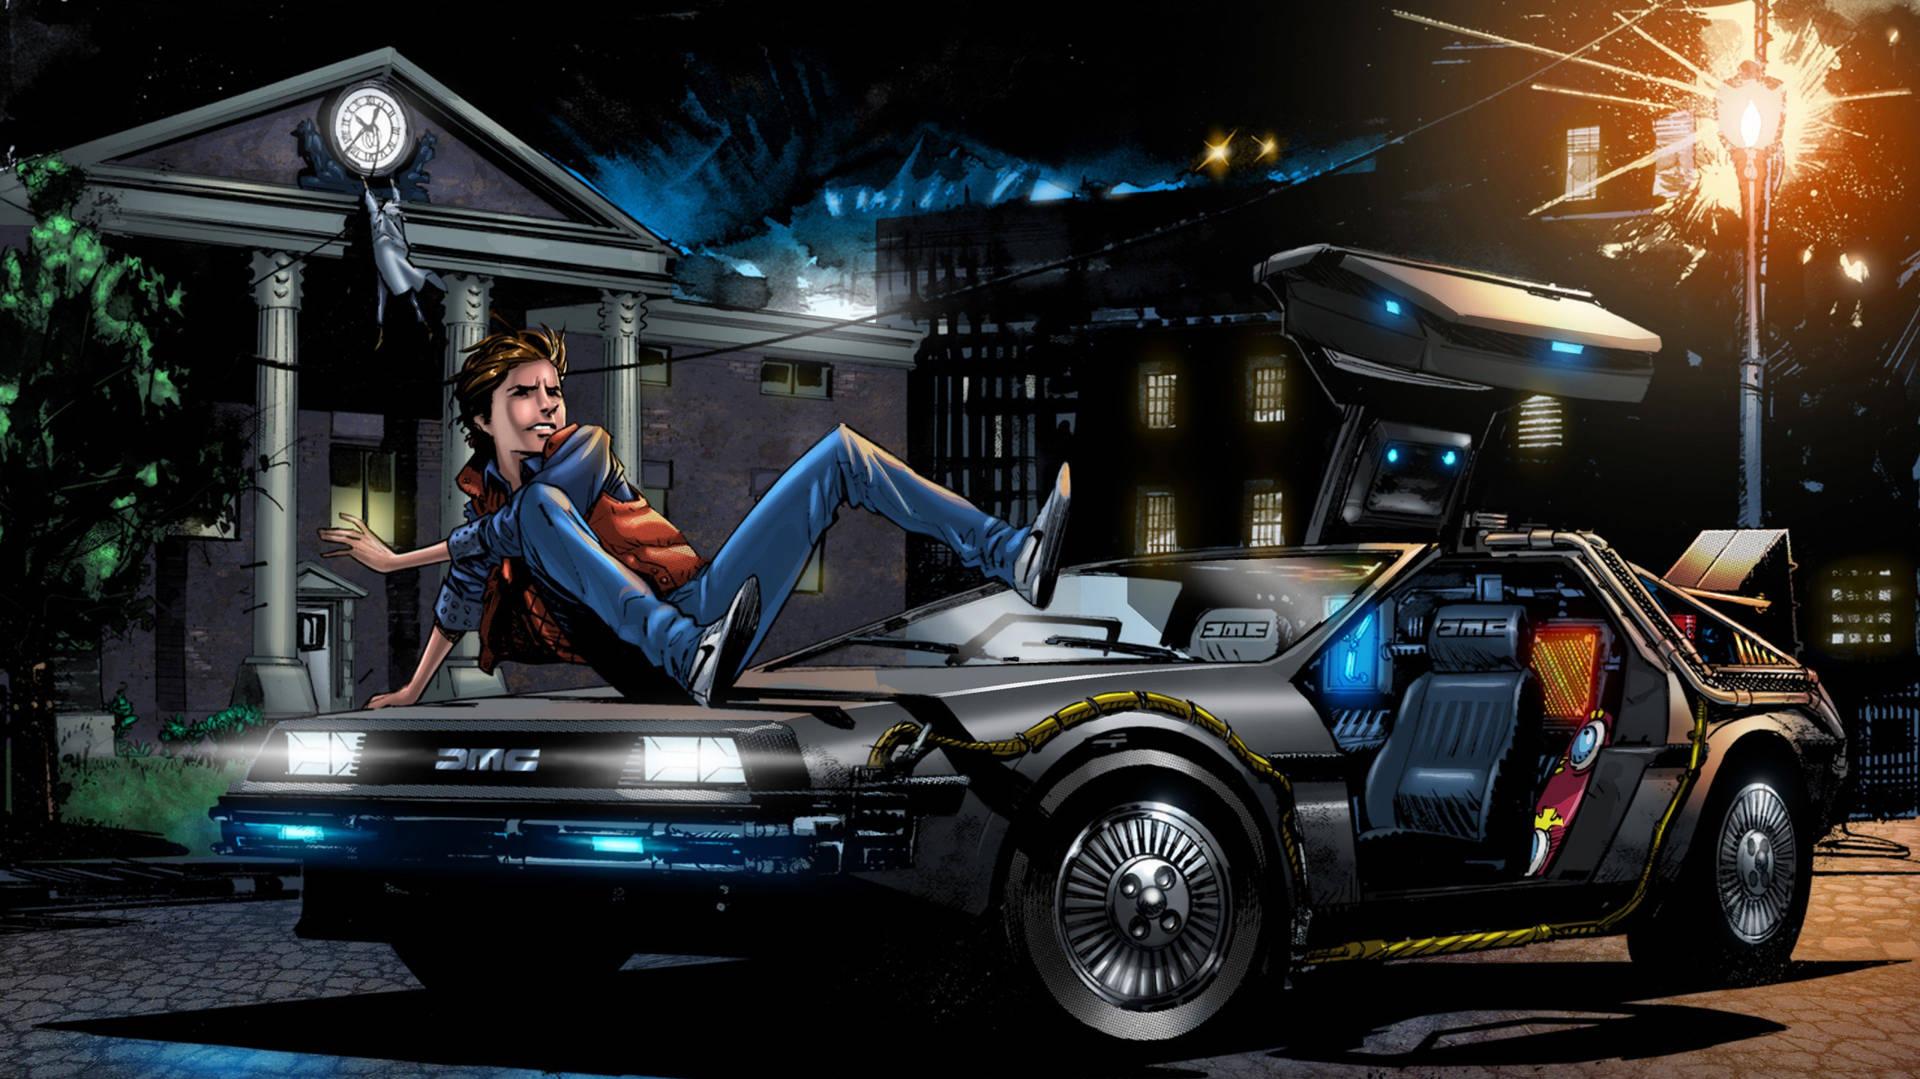 Download Back To The Future Digital Anime Wallpaper